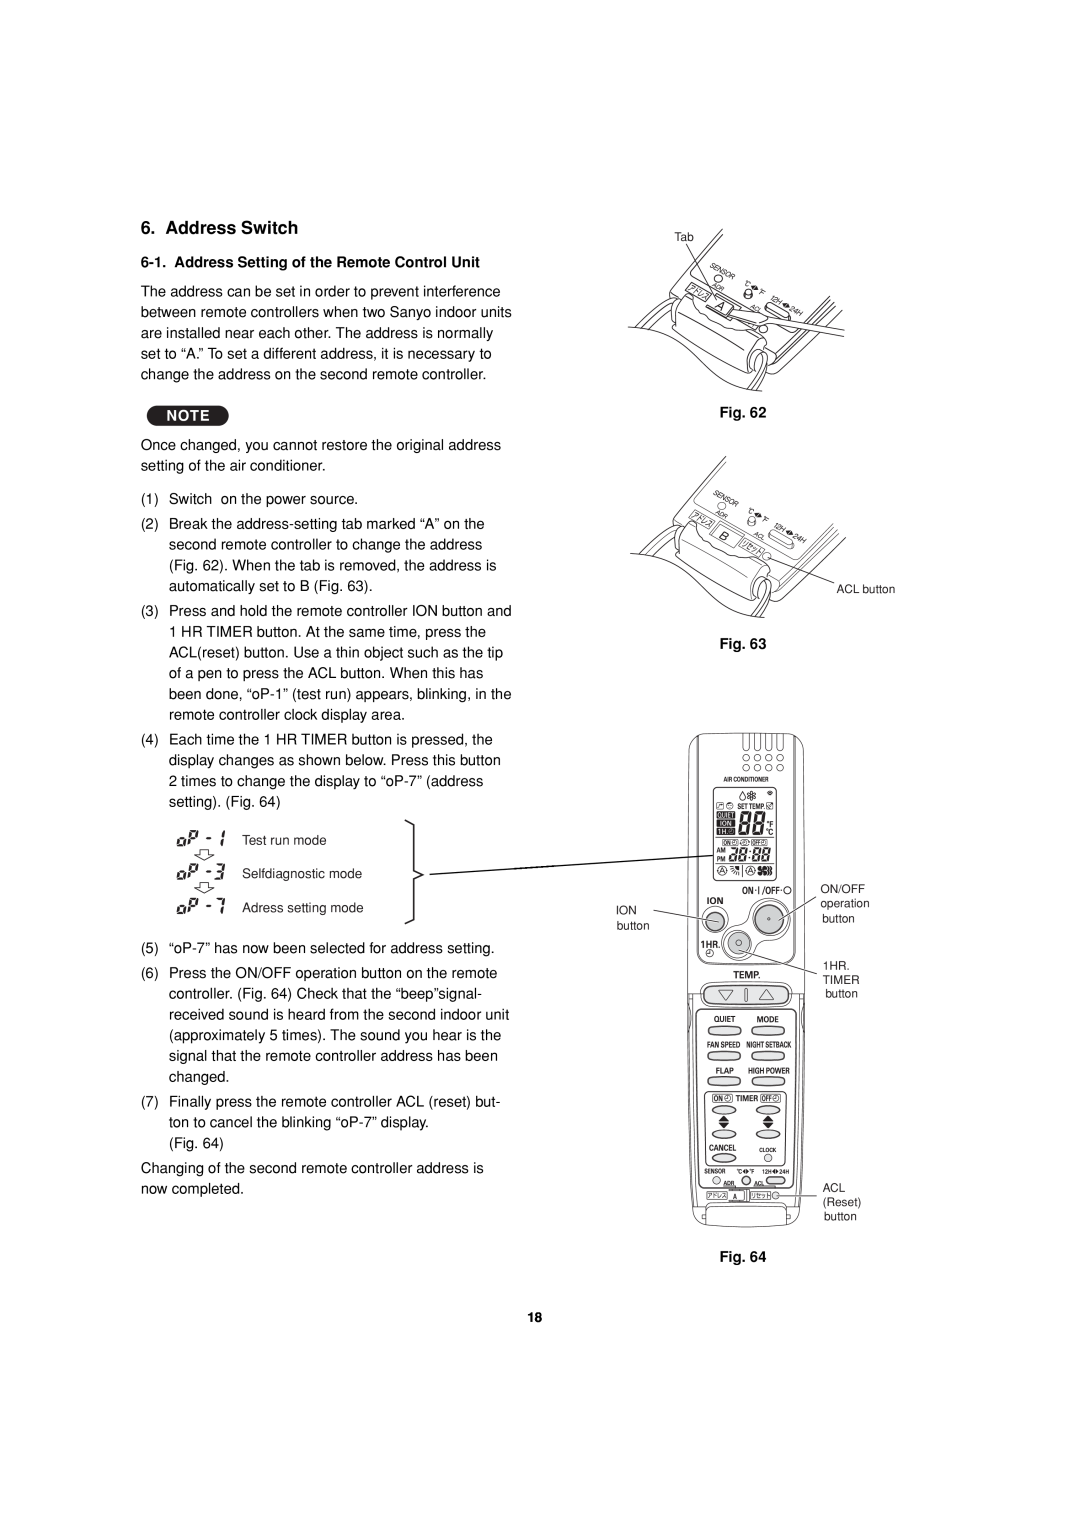 Sanyo KMS1872, KMS2472 service manual Address Switch, Address Setting of the Remote Control Unit 